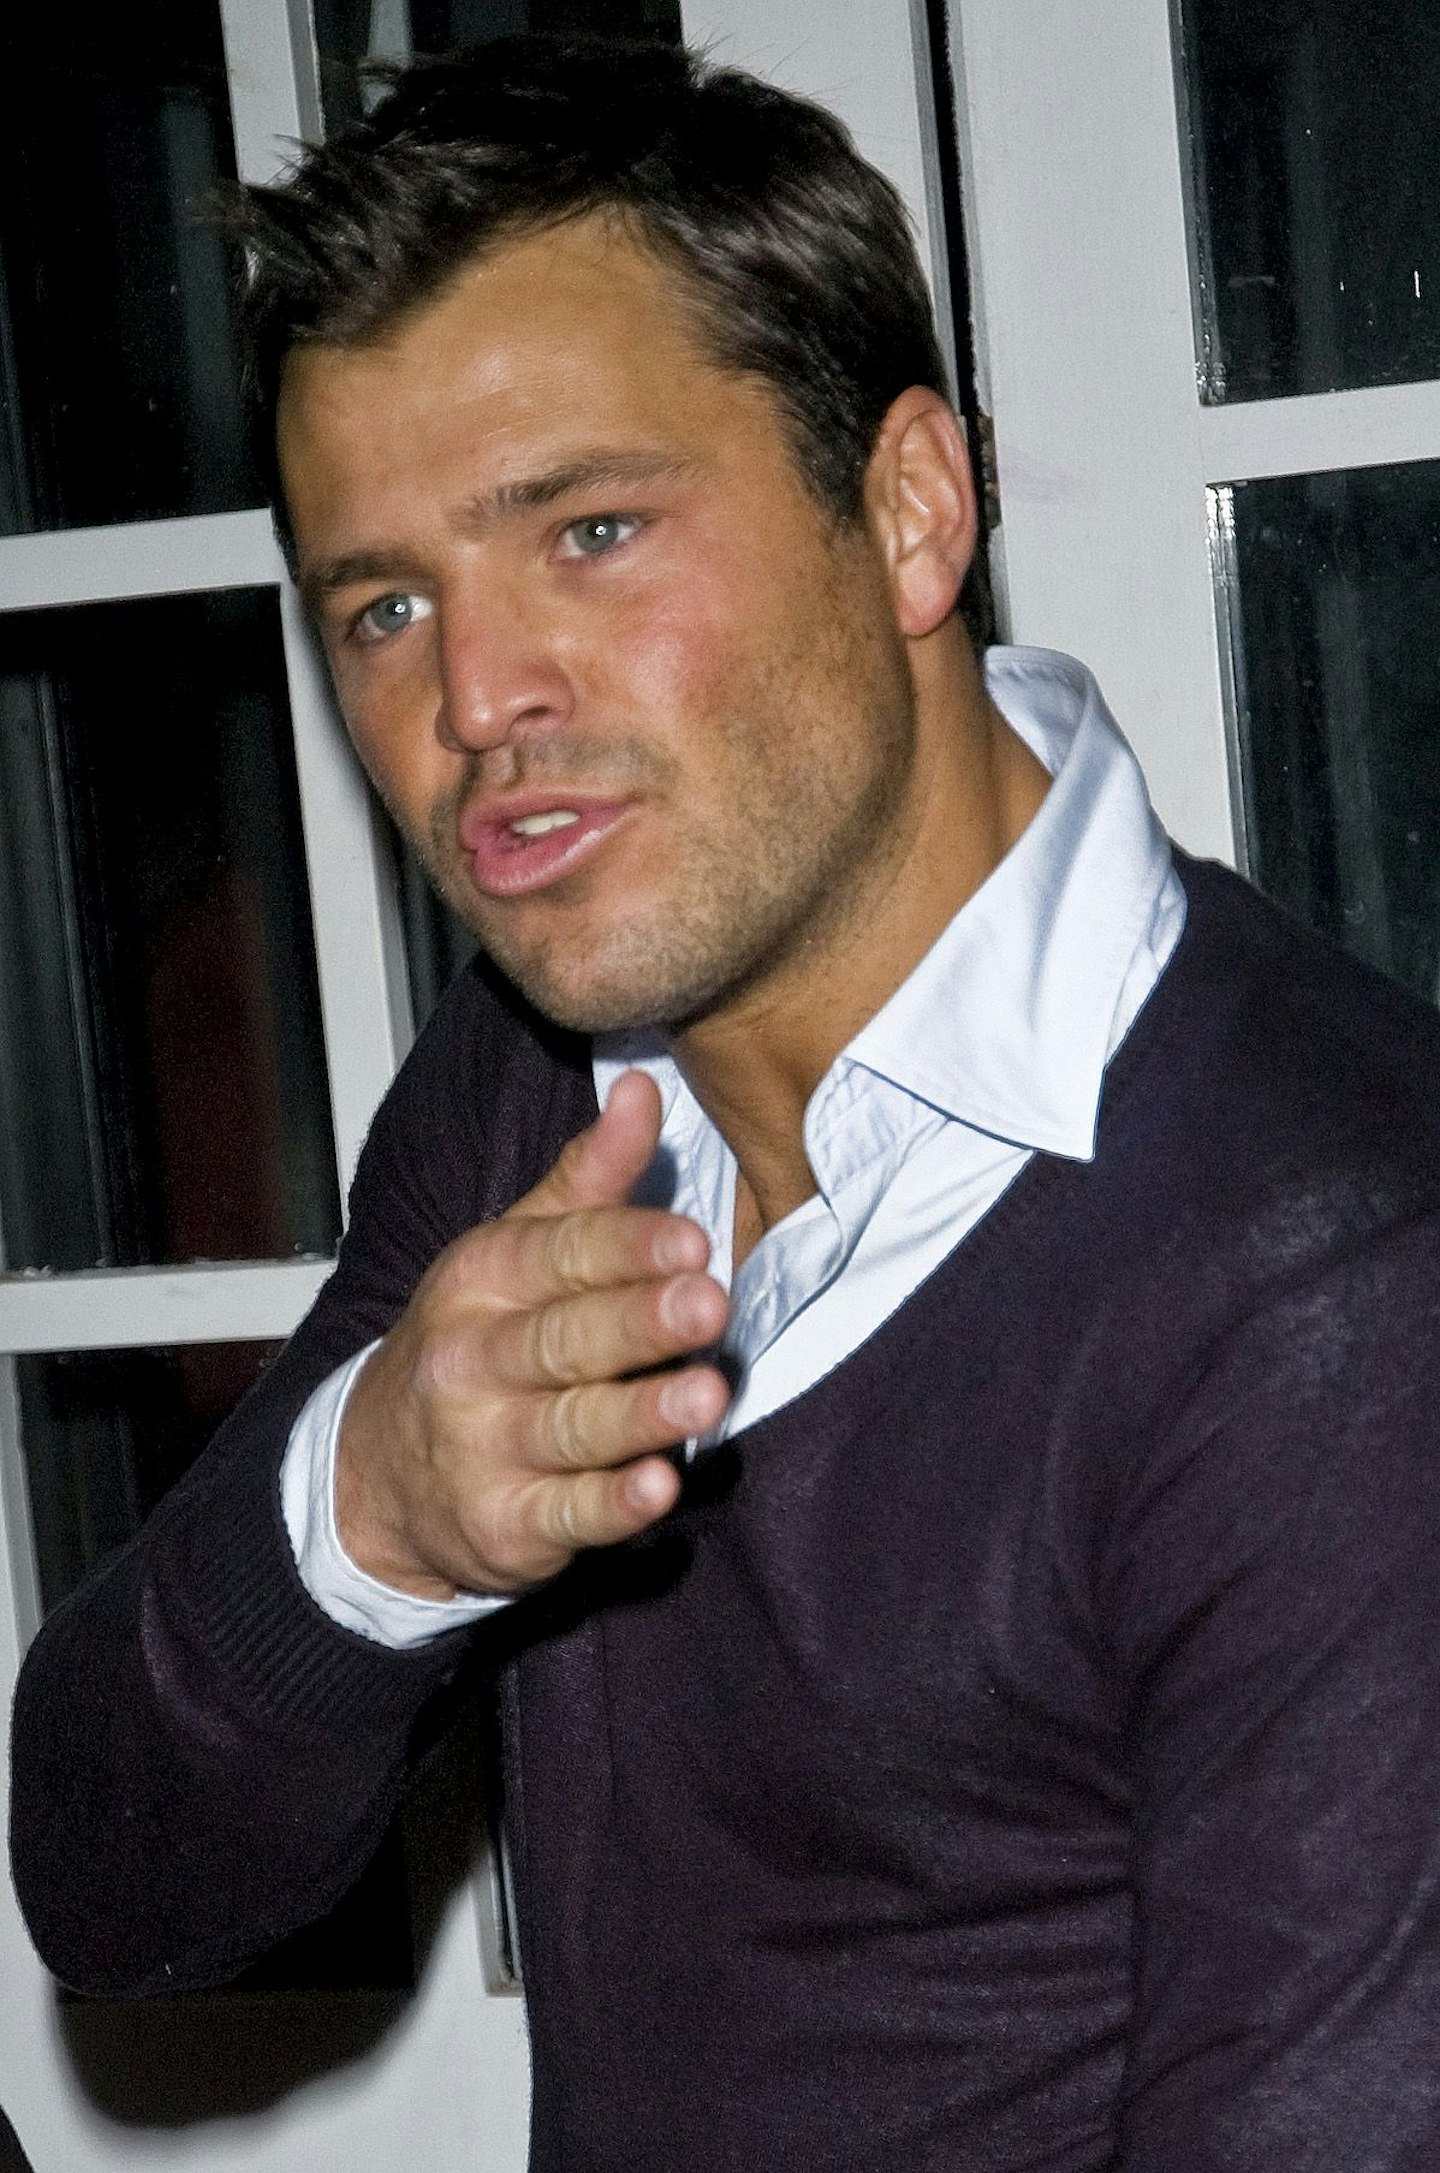 Mark wright at his own birthday party at the Chigwell in Essex